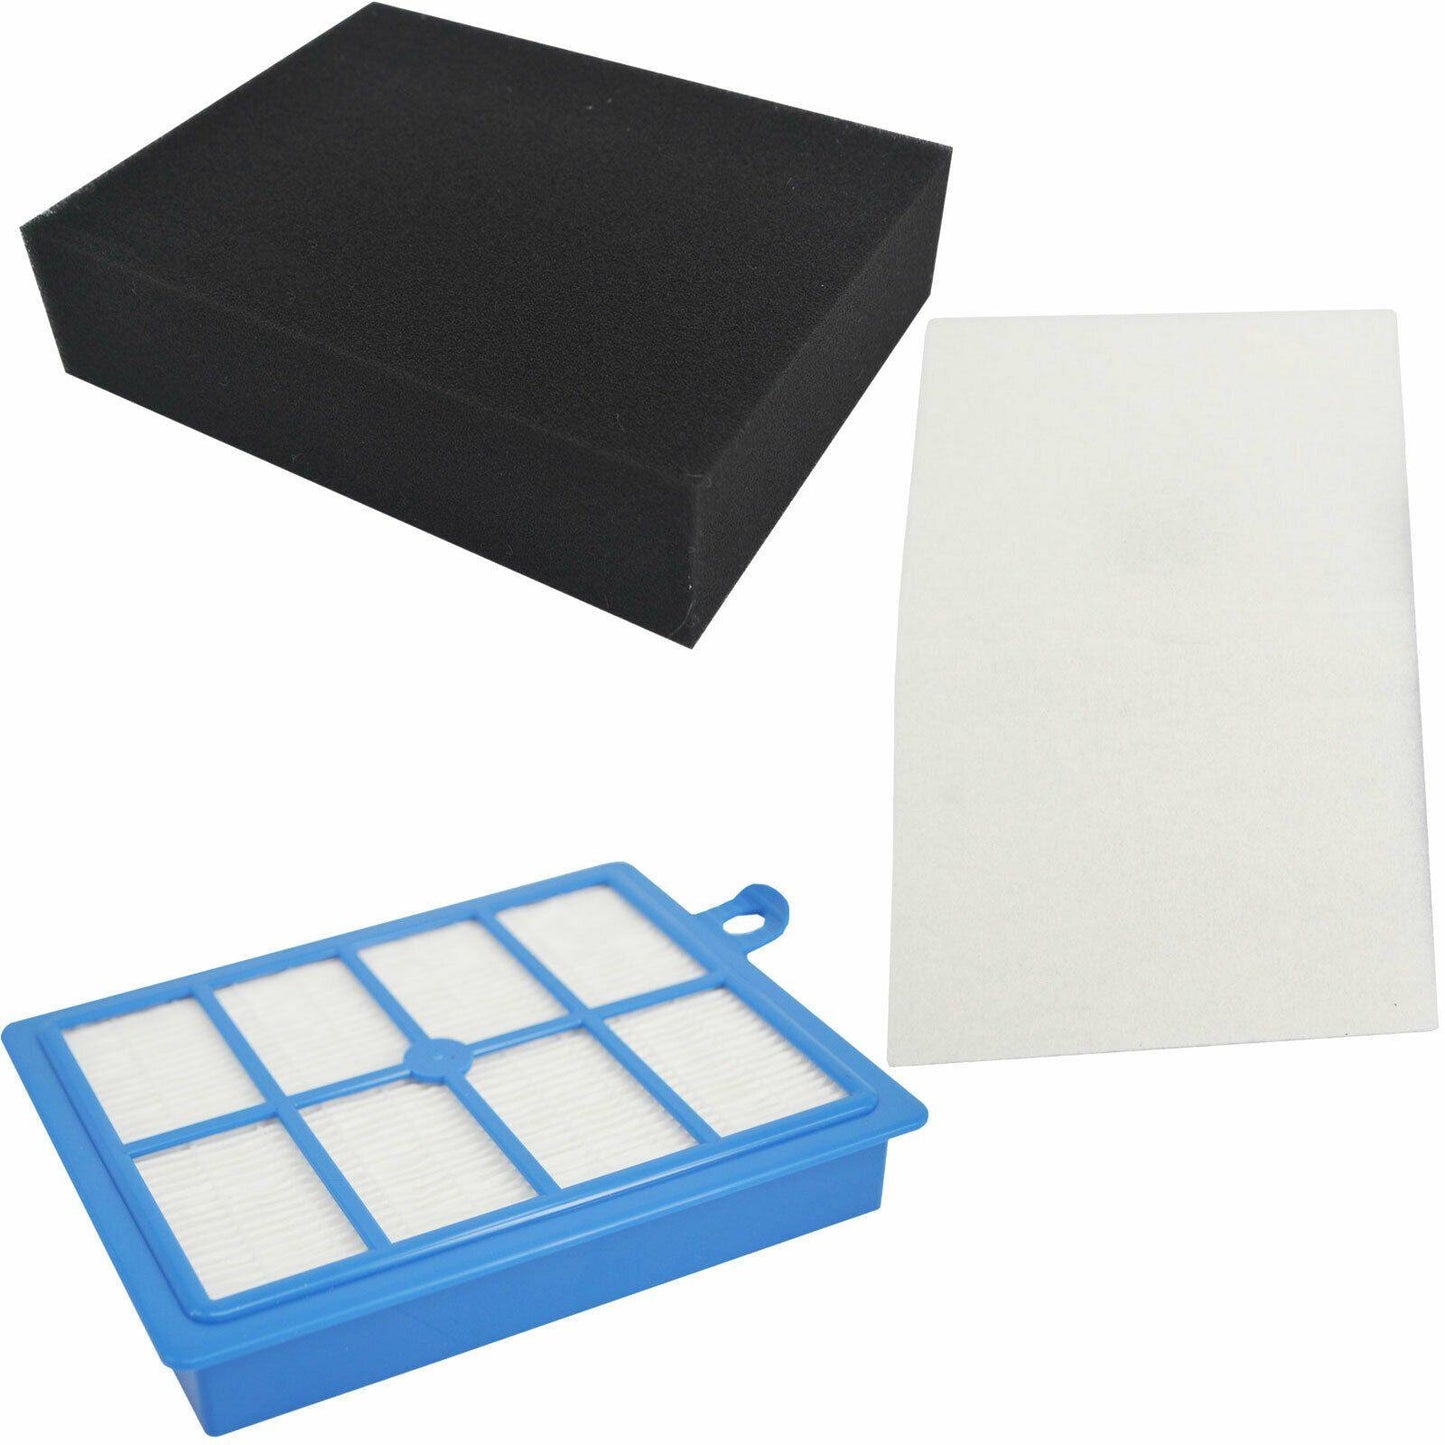 Vacuum Hepa Filter Starter kit VCSK4 For Electrolux Super Cyclone XL Dust N Gone Sparesbarn